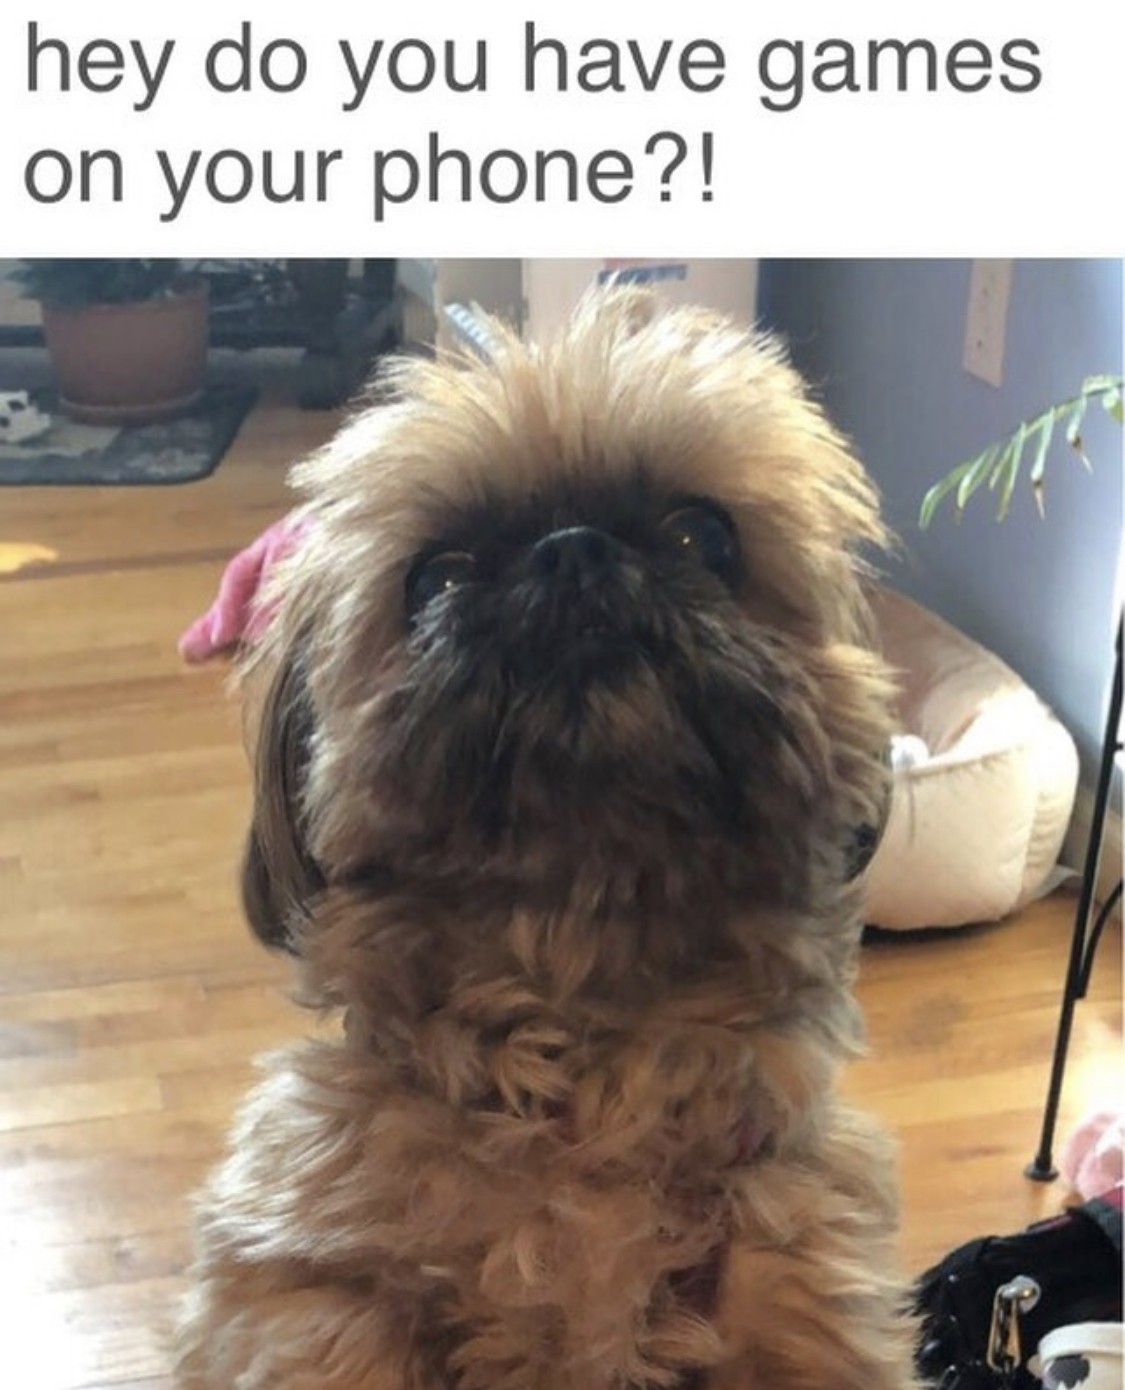 Shih Tzu looking up with its big eyes photo with a caption that reads 